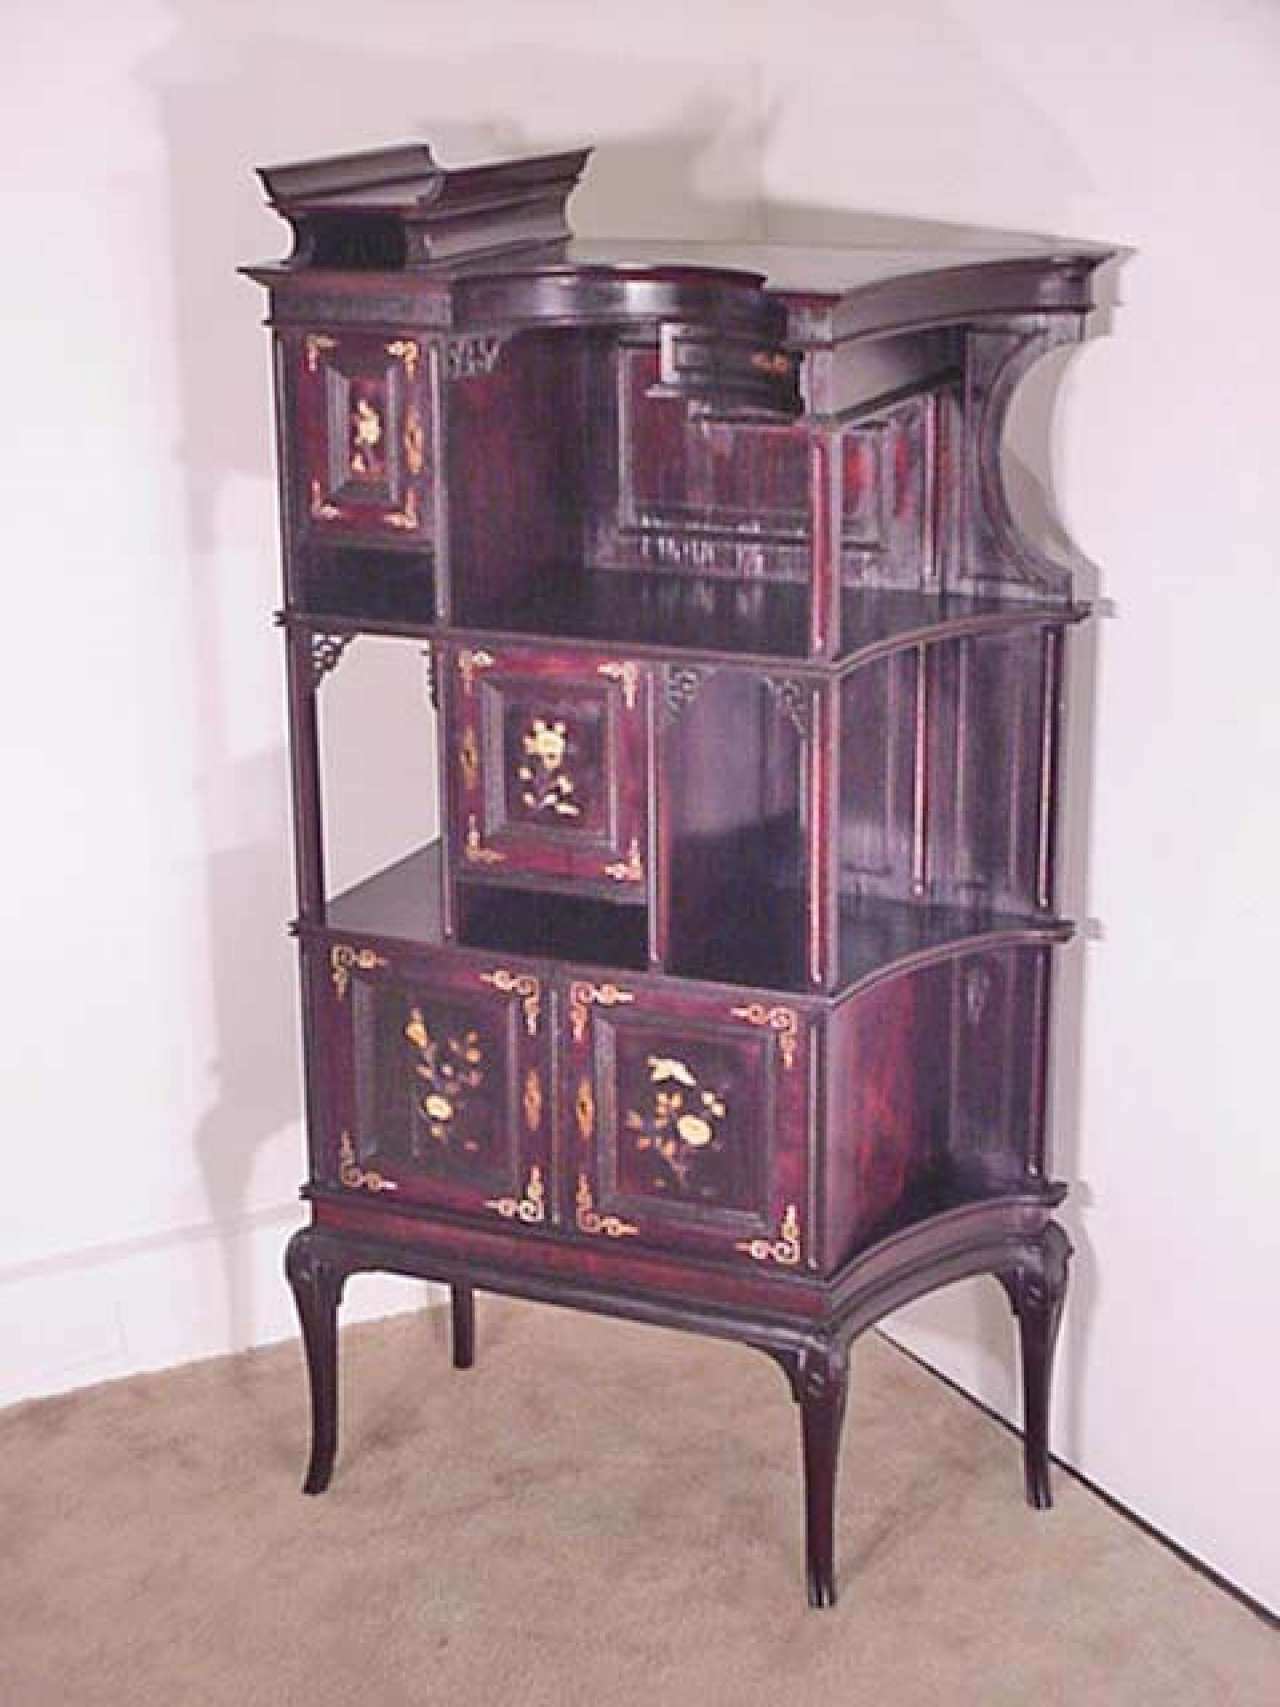 Oriental, Asian Inspired Cabinet